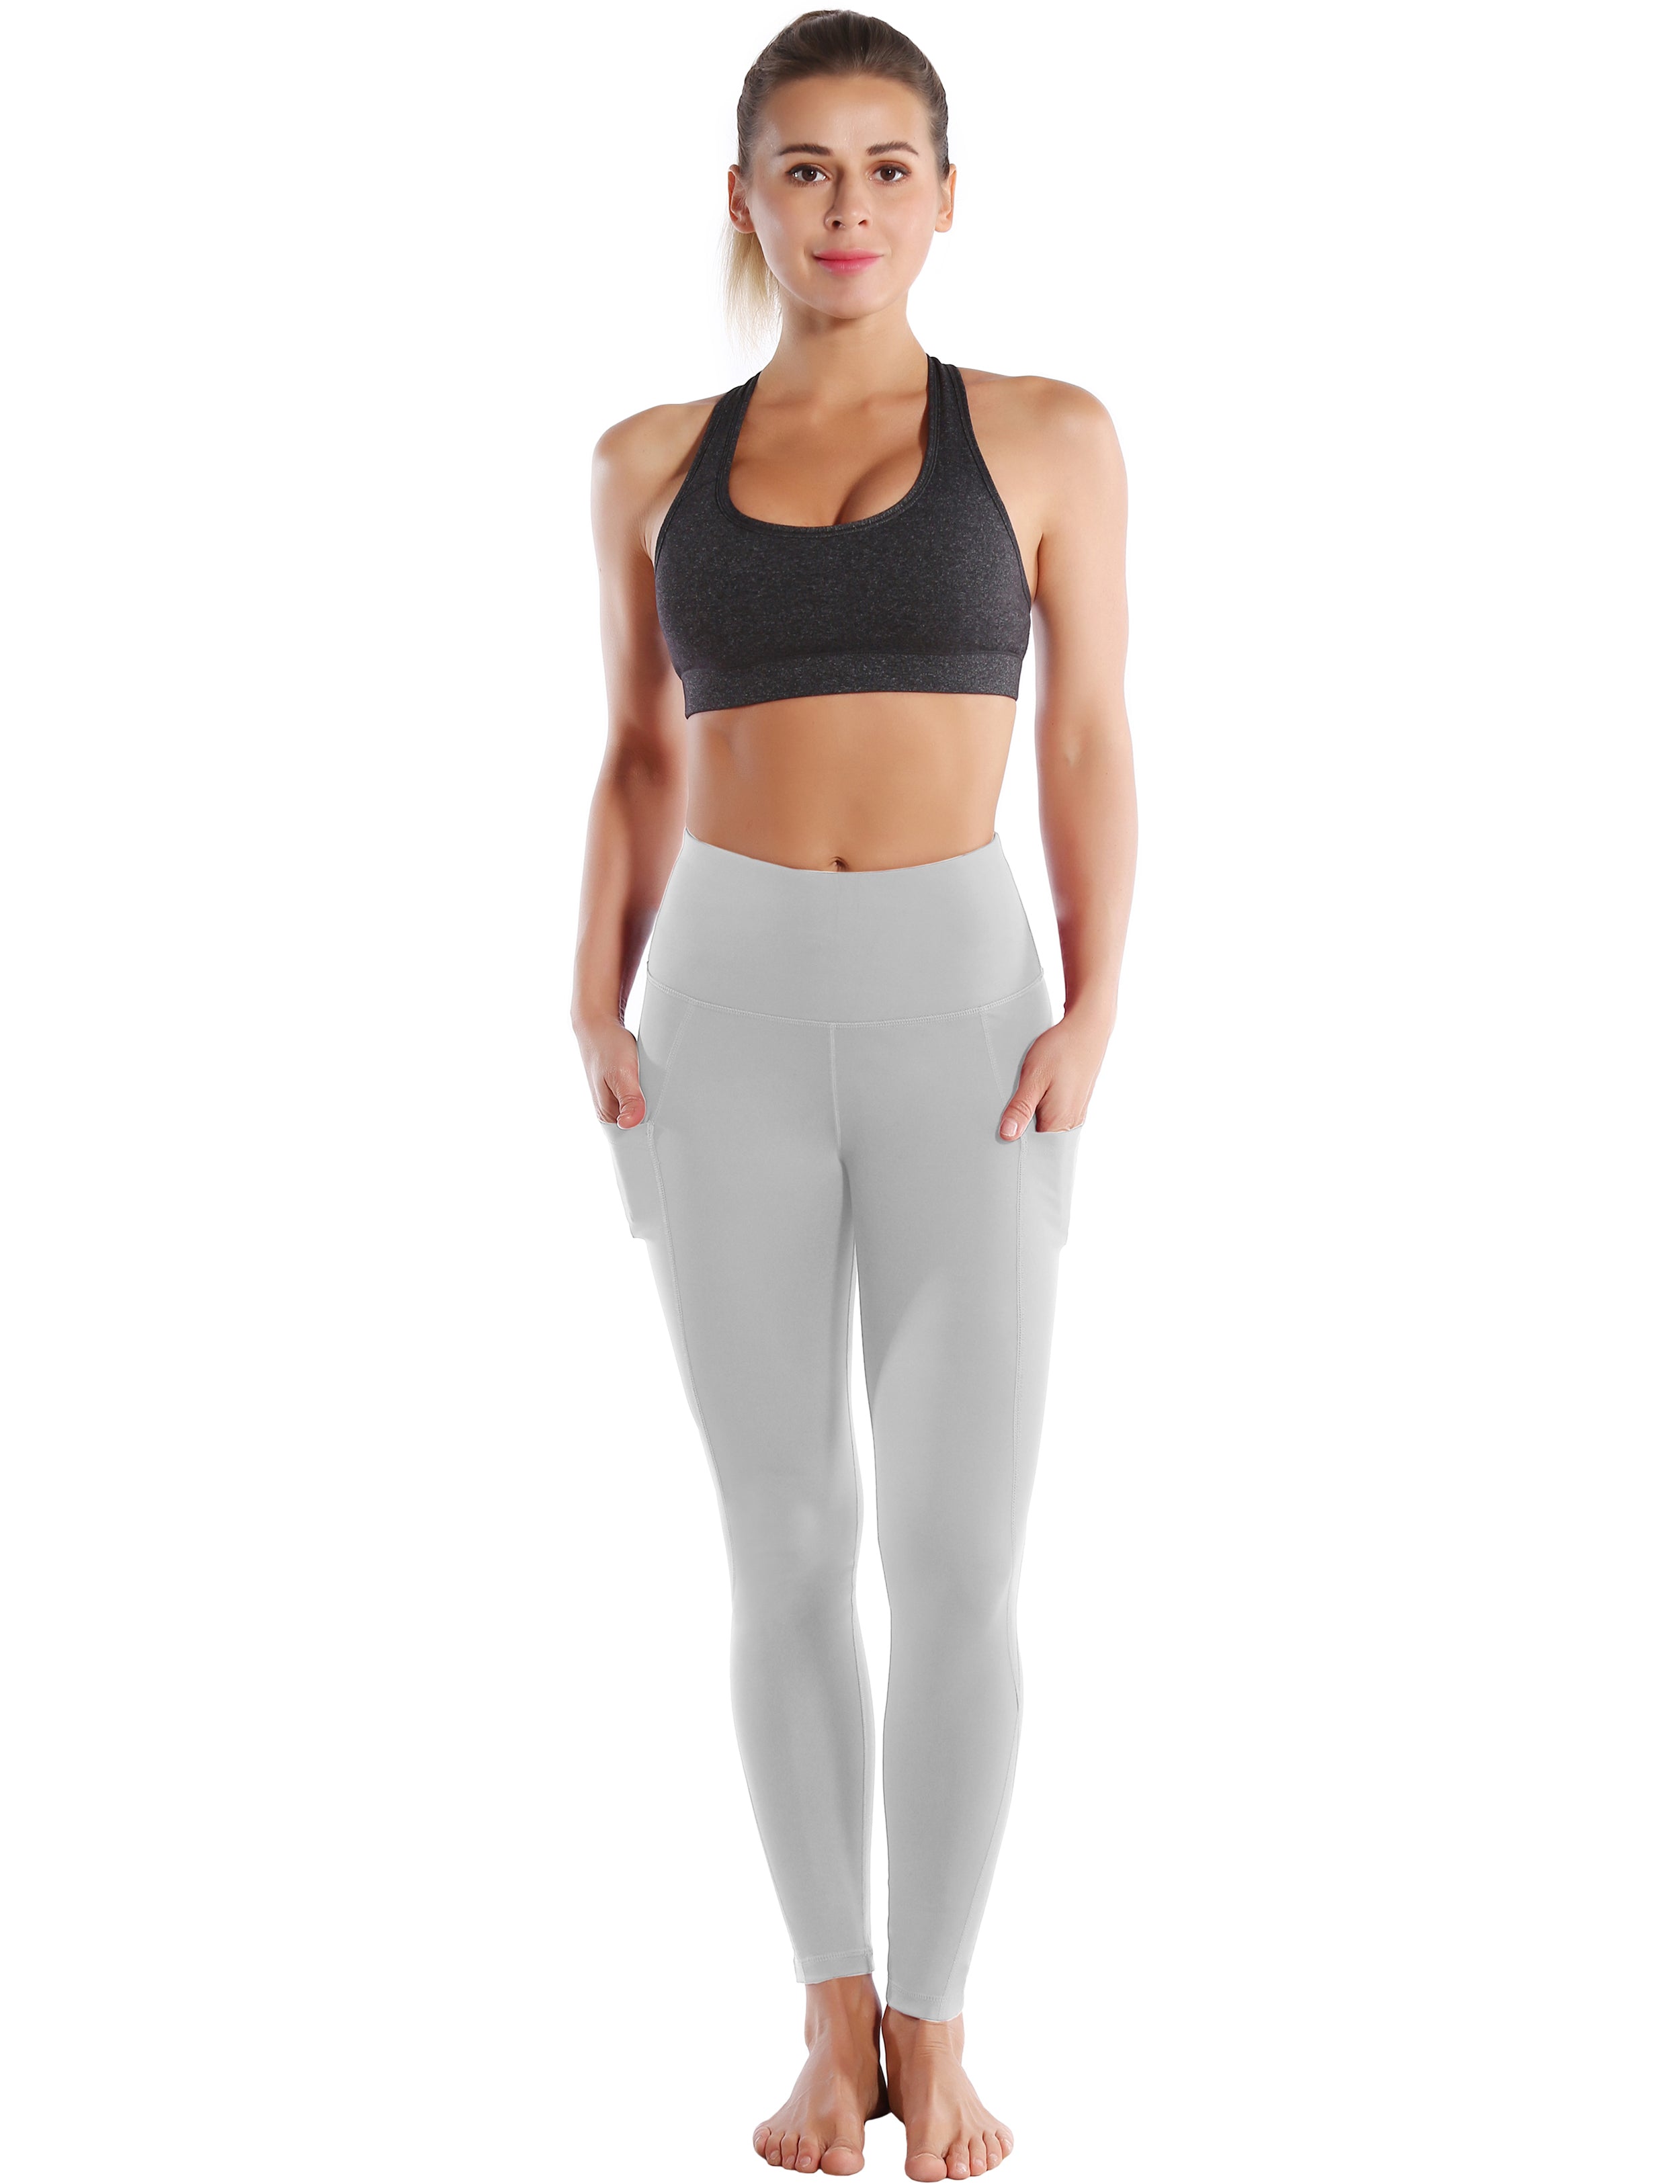 High Waist Side Pockets Yoga Pants lightgray 75% Nylon, 25% Spandex Fabric doesn't attract lint easily 4-way stretch No see-through Moisture-wicking Tummy control Inner pocket